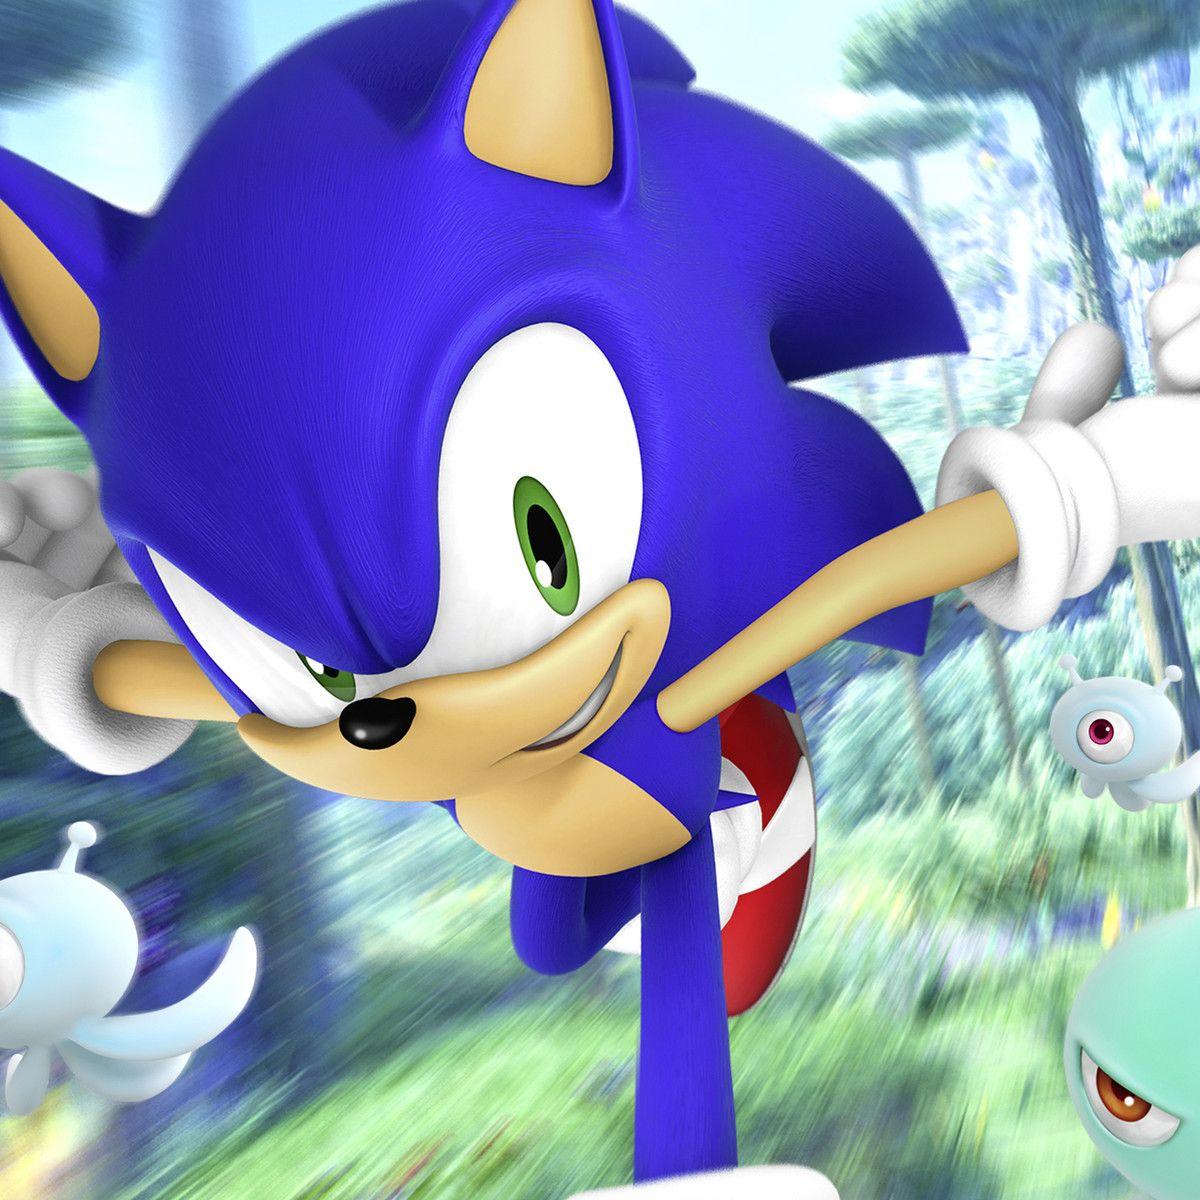 Sonic the Hedgehog will be a juvenile delinquent outrunning local